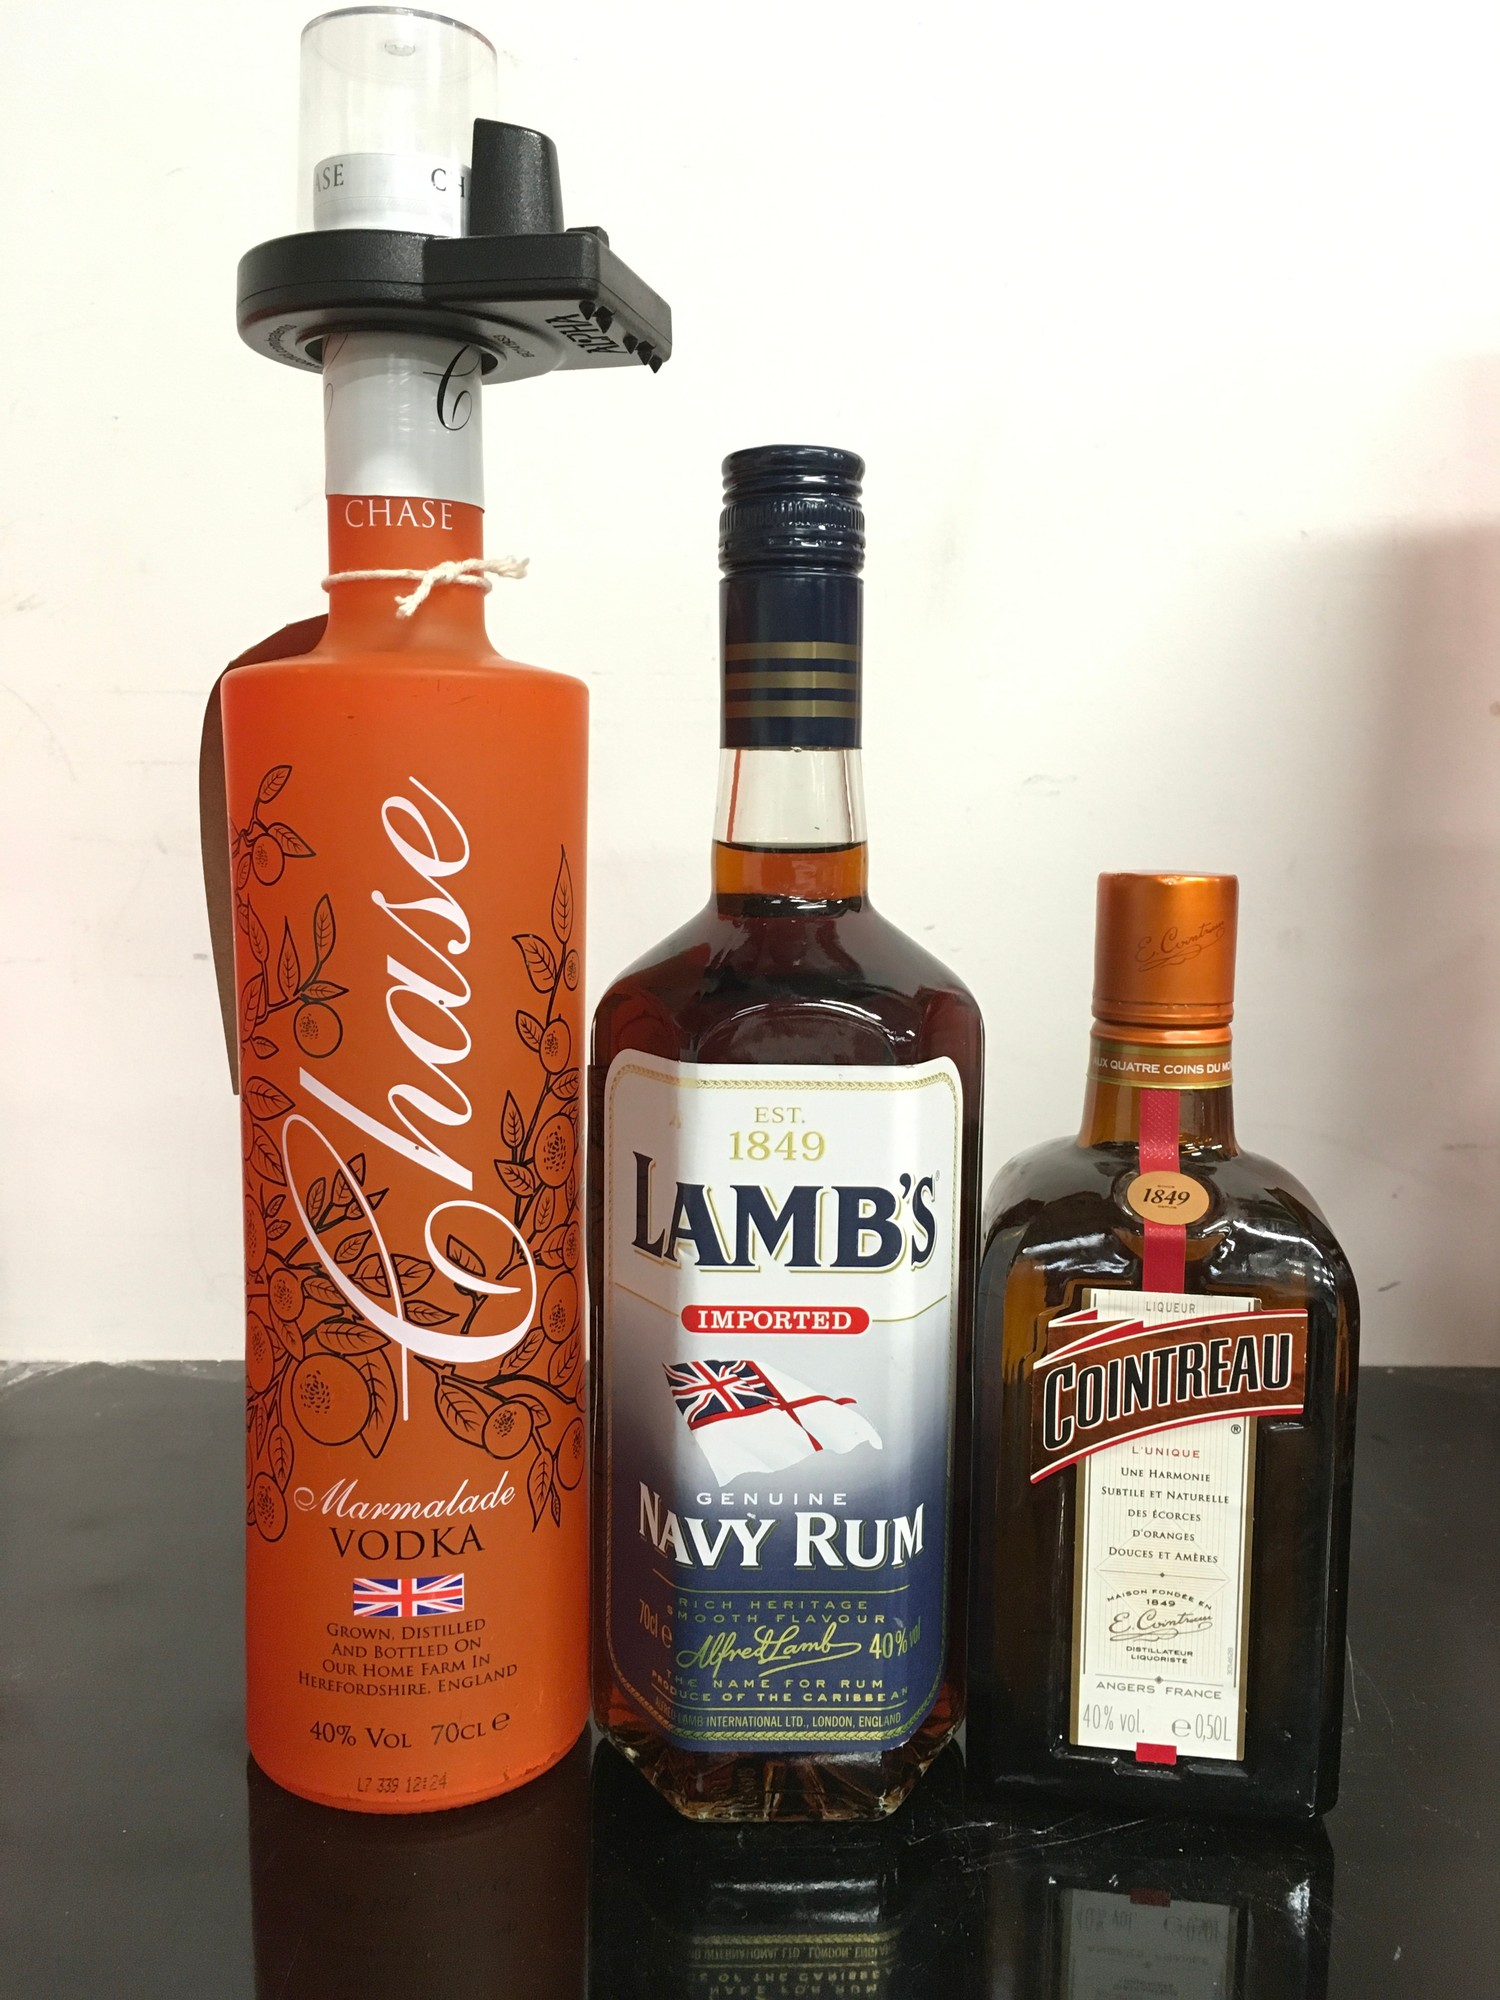 Three bottles of alcohol: Chase Marmalade Vodka 70cl, Lamb?s Navy Rum 70cl, Cointreau 50cl. Ref